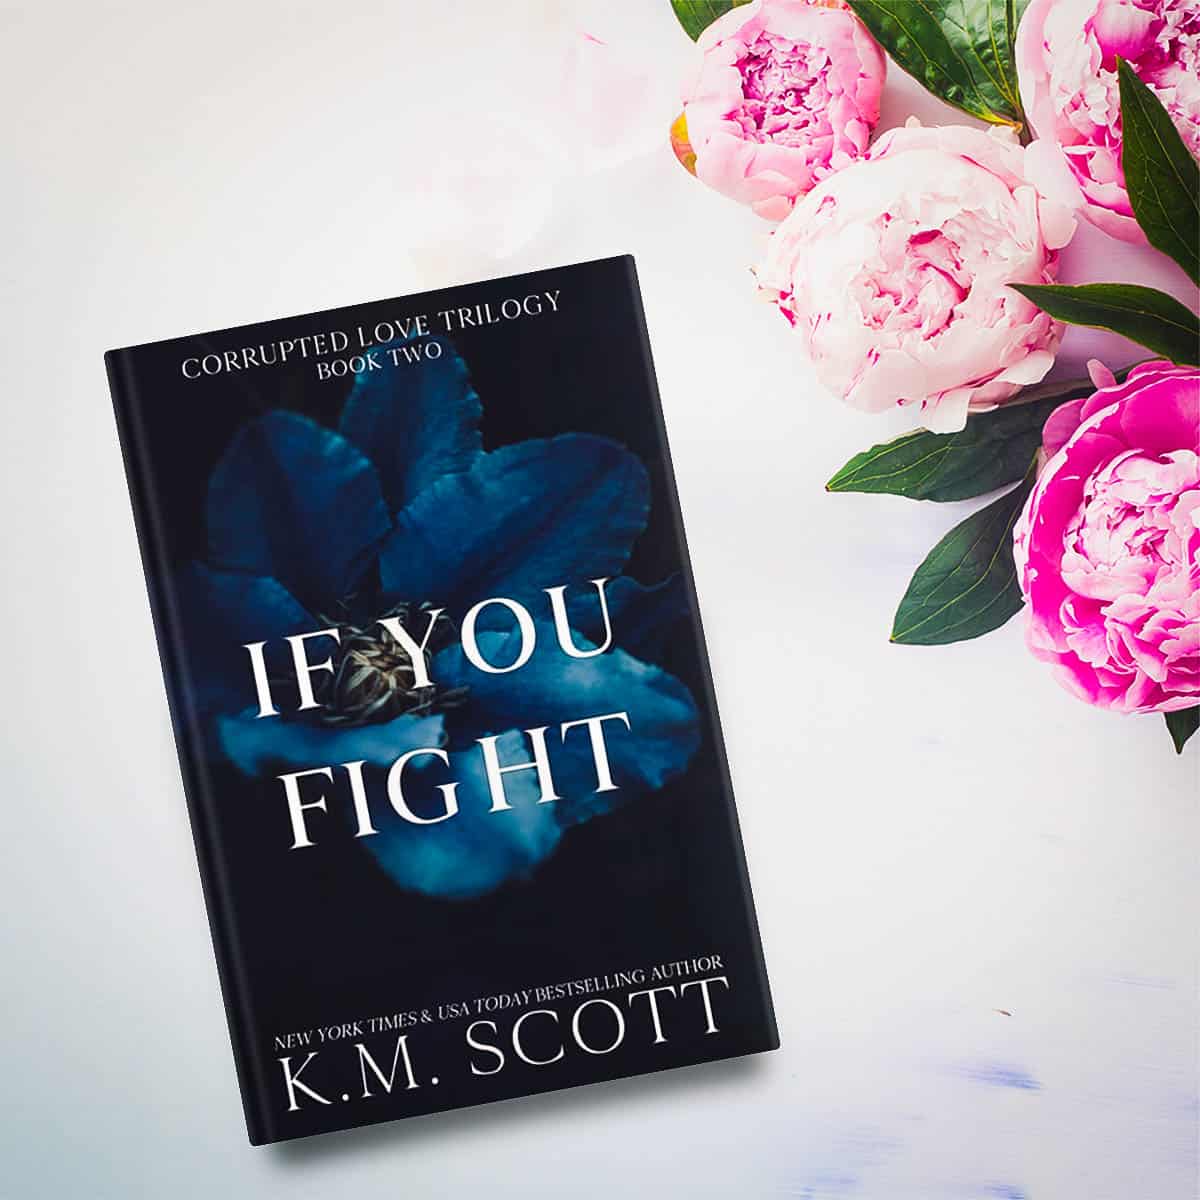 If You Fight by KM Scott – Corrupted Love Book 2